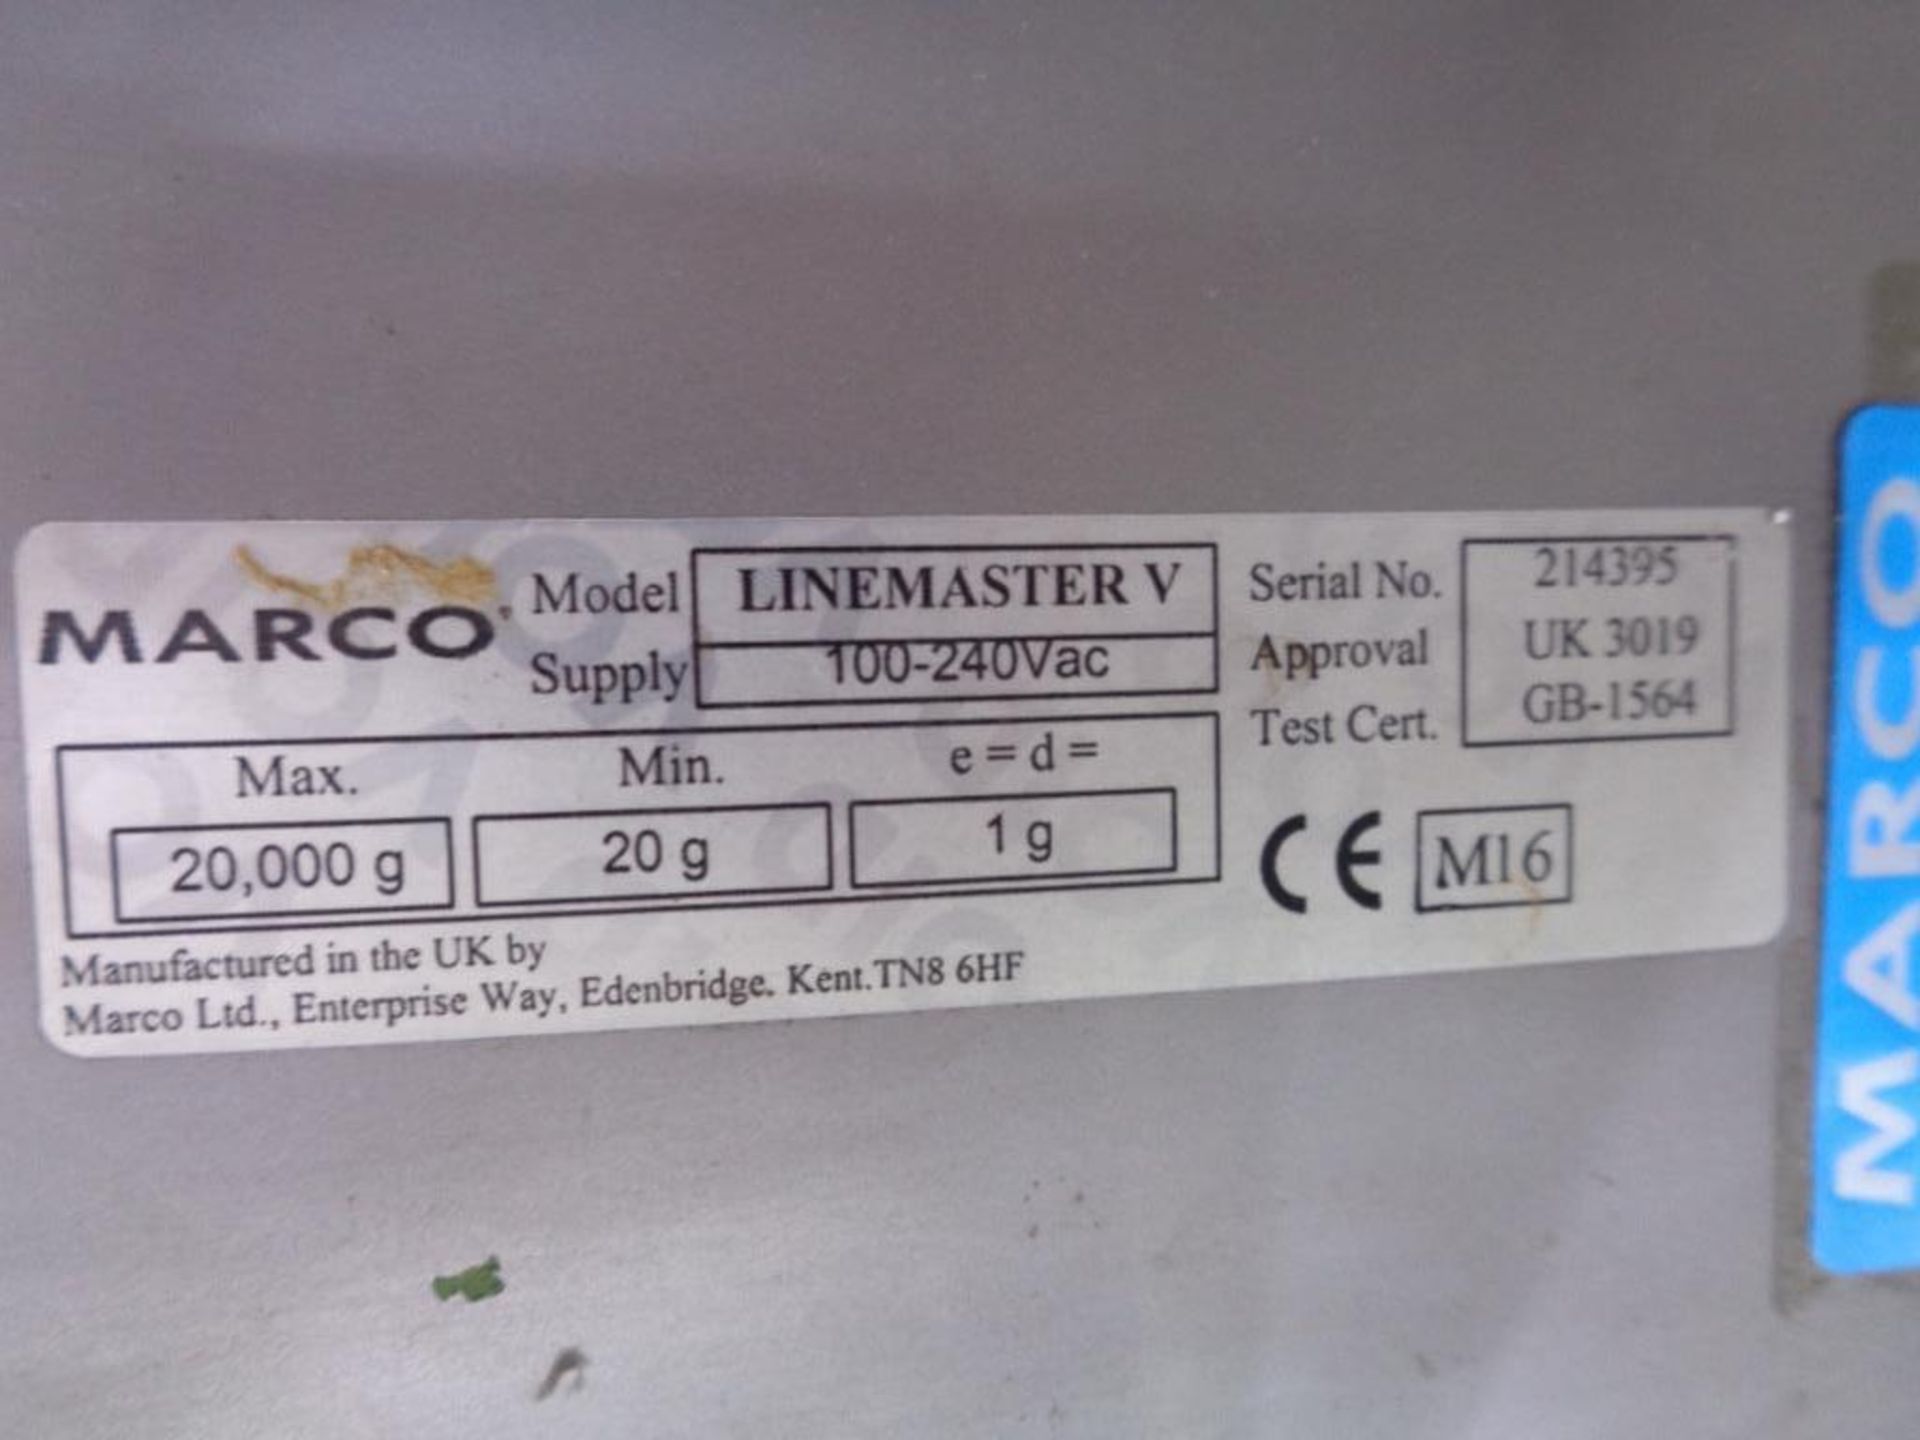 Marco Linemaster V D103471 stainless steel product weigh scales - Image 4 of 4